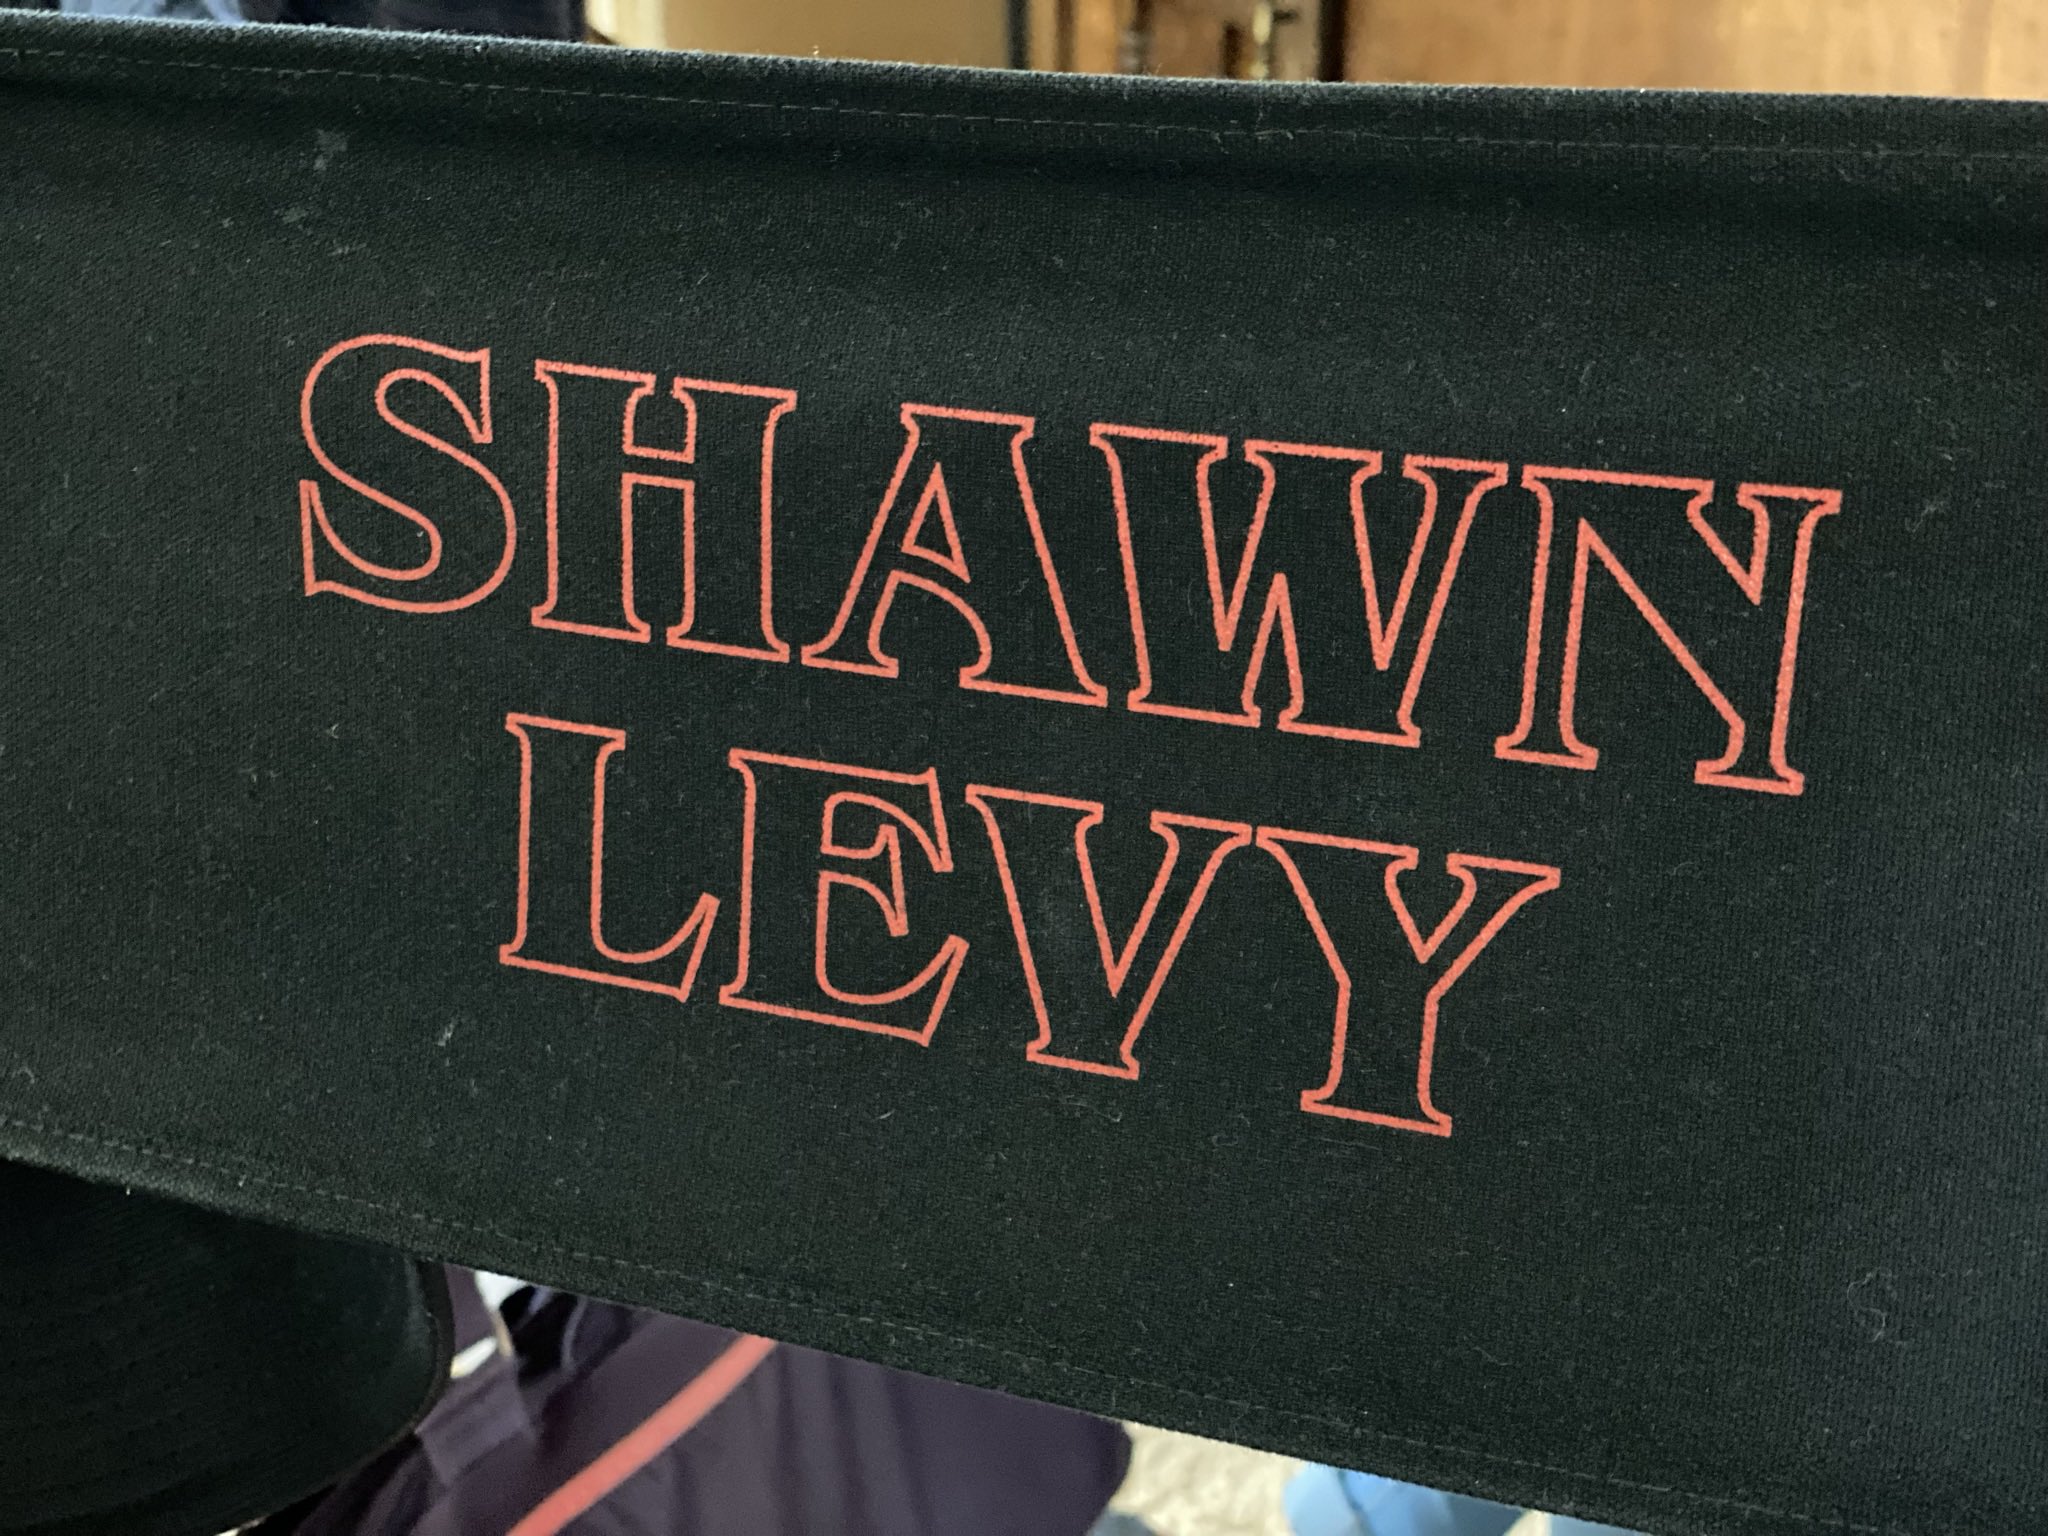 Shawn Levy on X: Just came across some pics I took while shooting